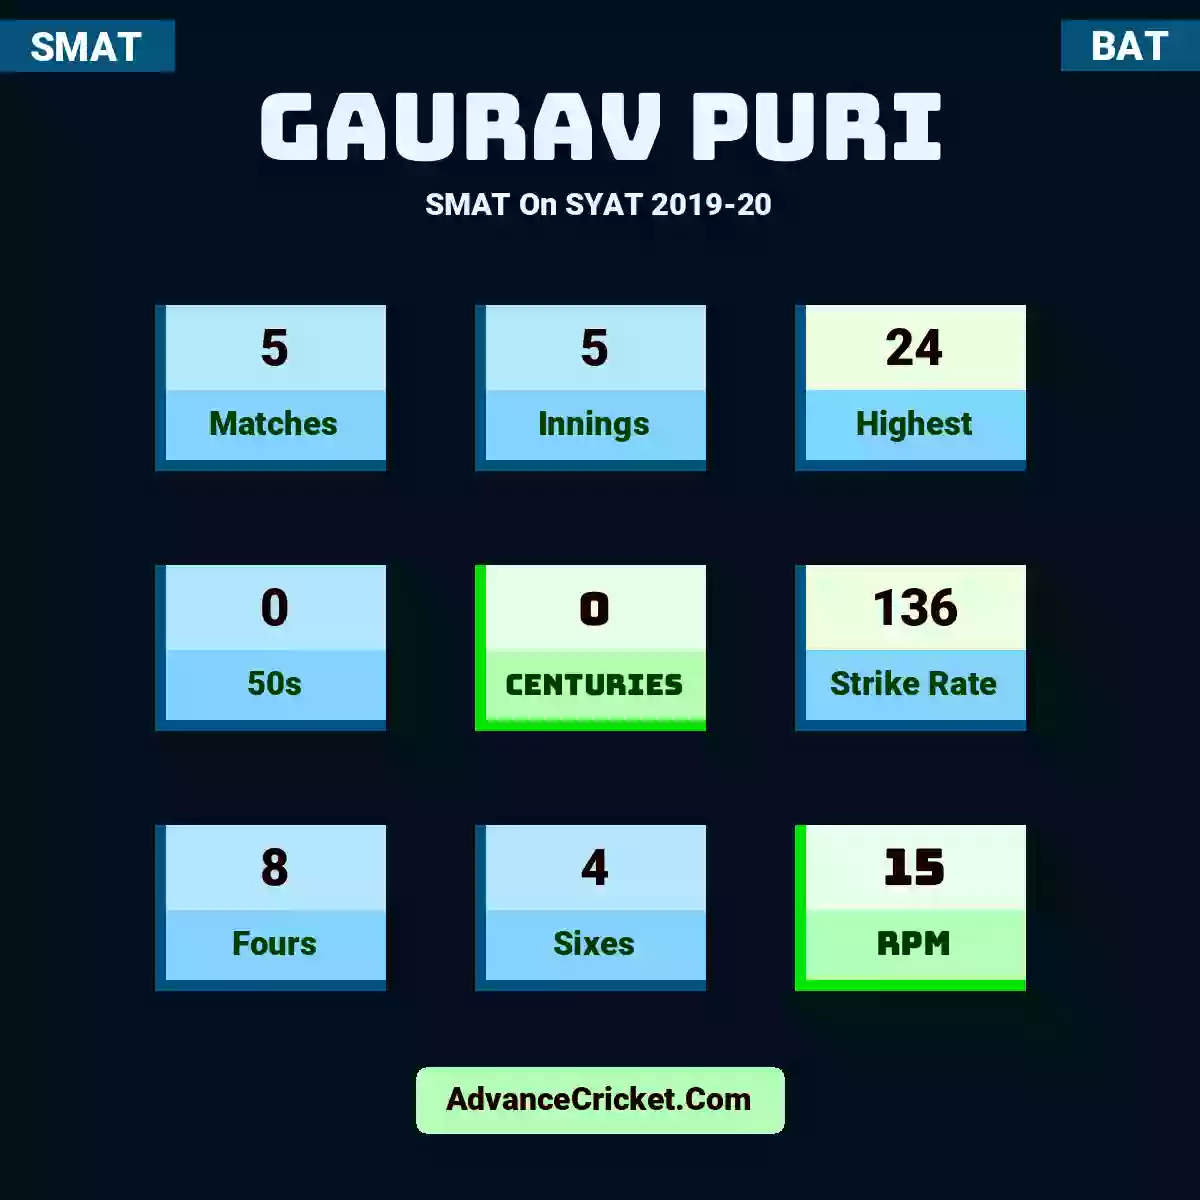 Gaurav Puri SMAT  On SYAT 2019-20, Gaurav Puri played 5 matches, scored 24 runs as highest, 0 half-centuries, and 0 centuries, with a strike rate of 136. G.Puri hit 8 fours and 4 sixes, with an RPM of 15.